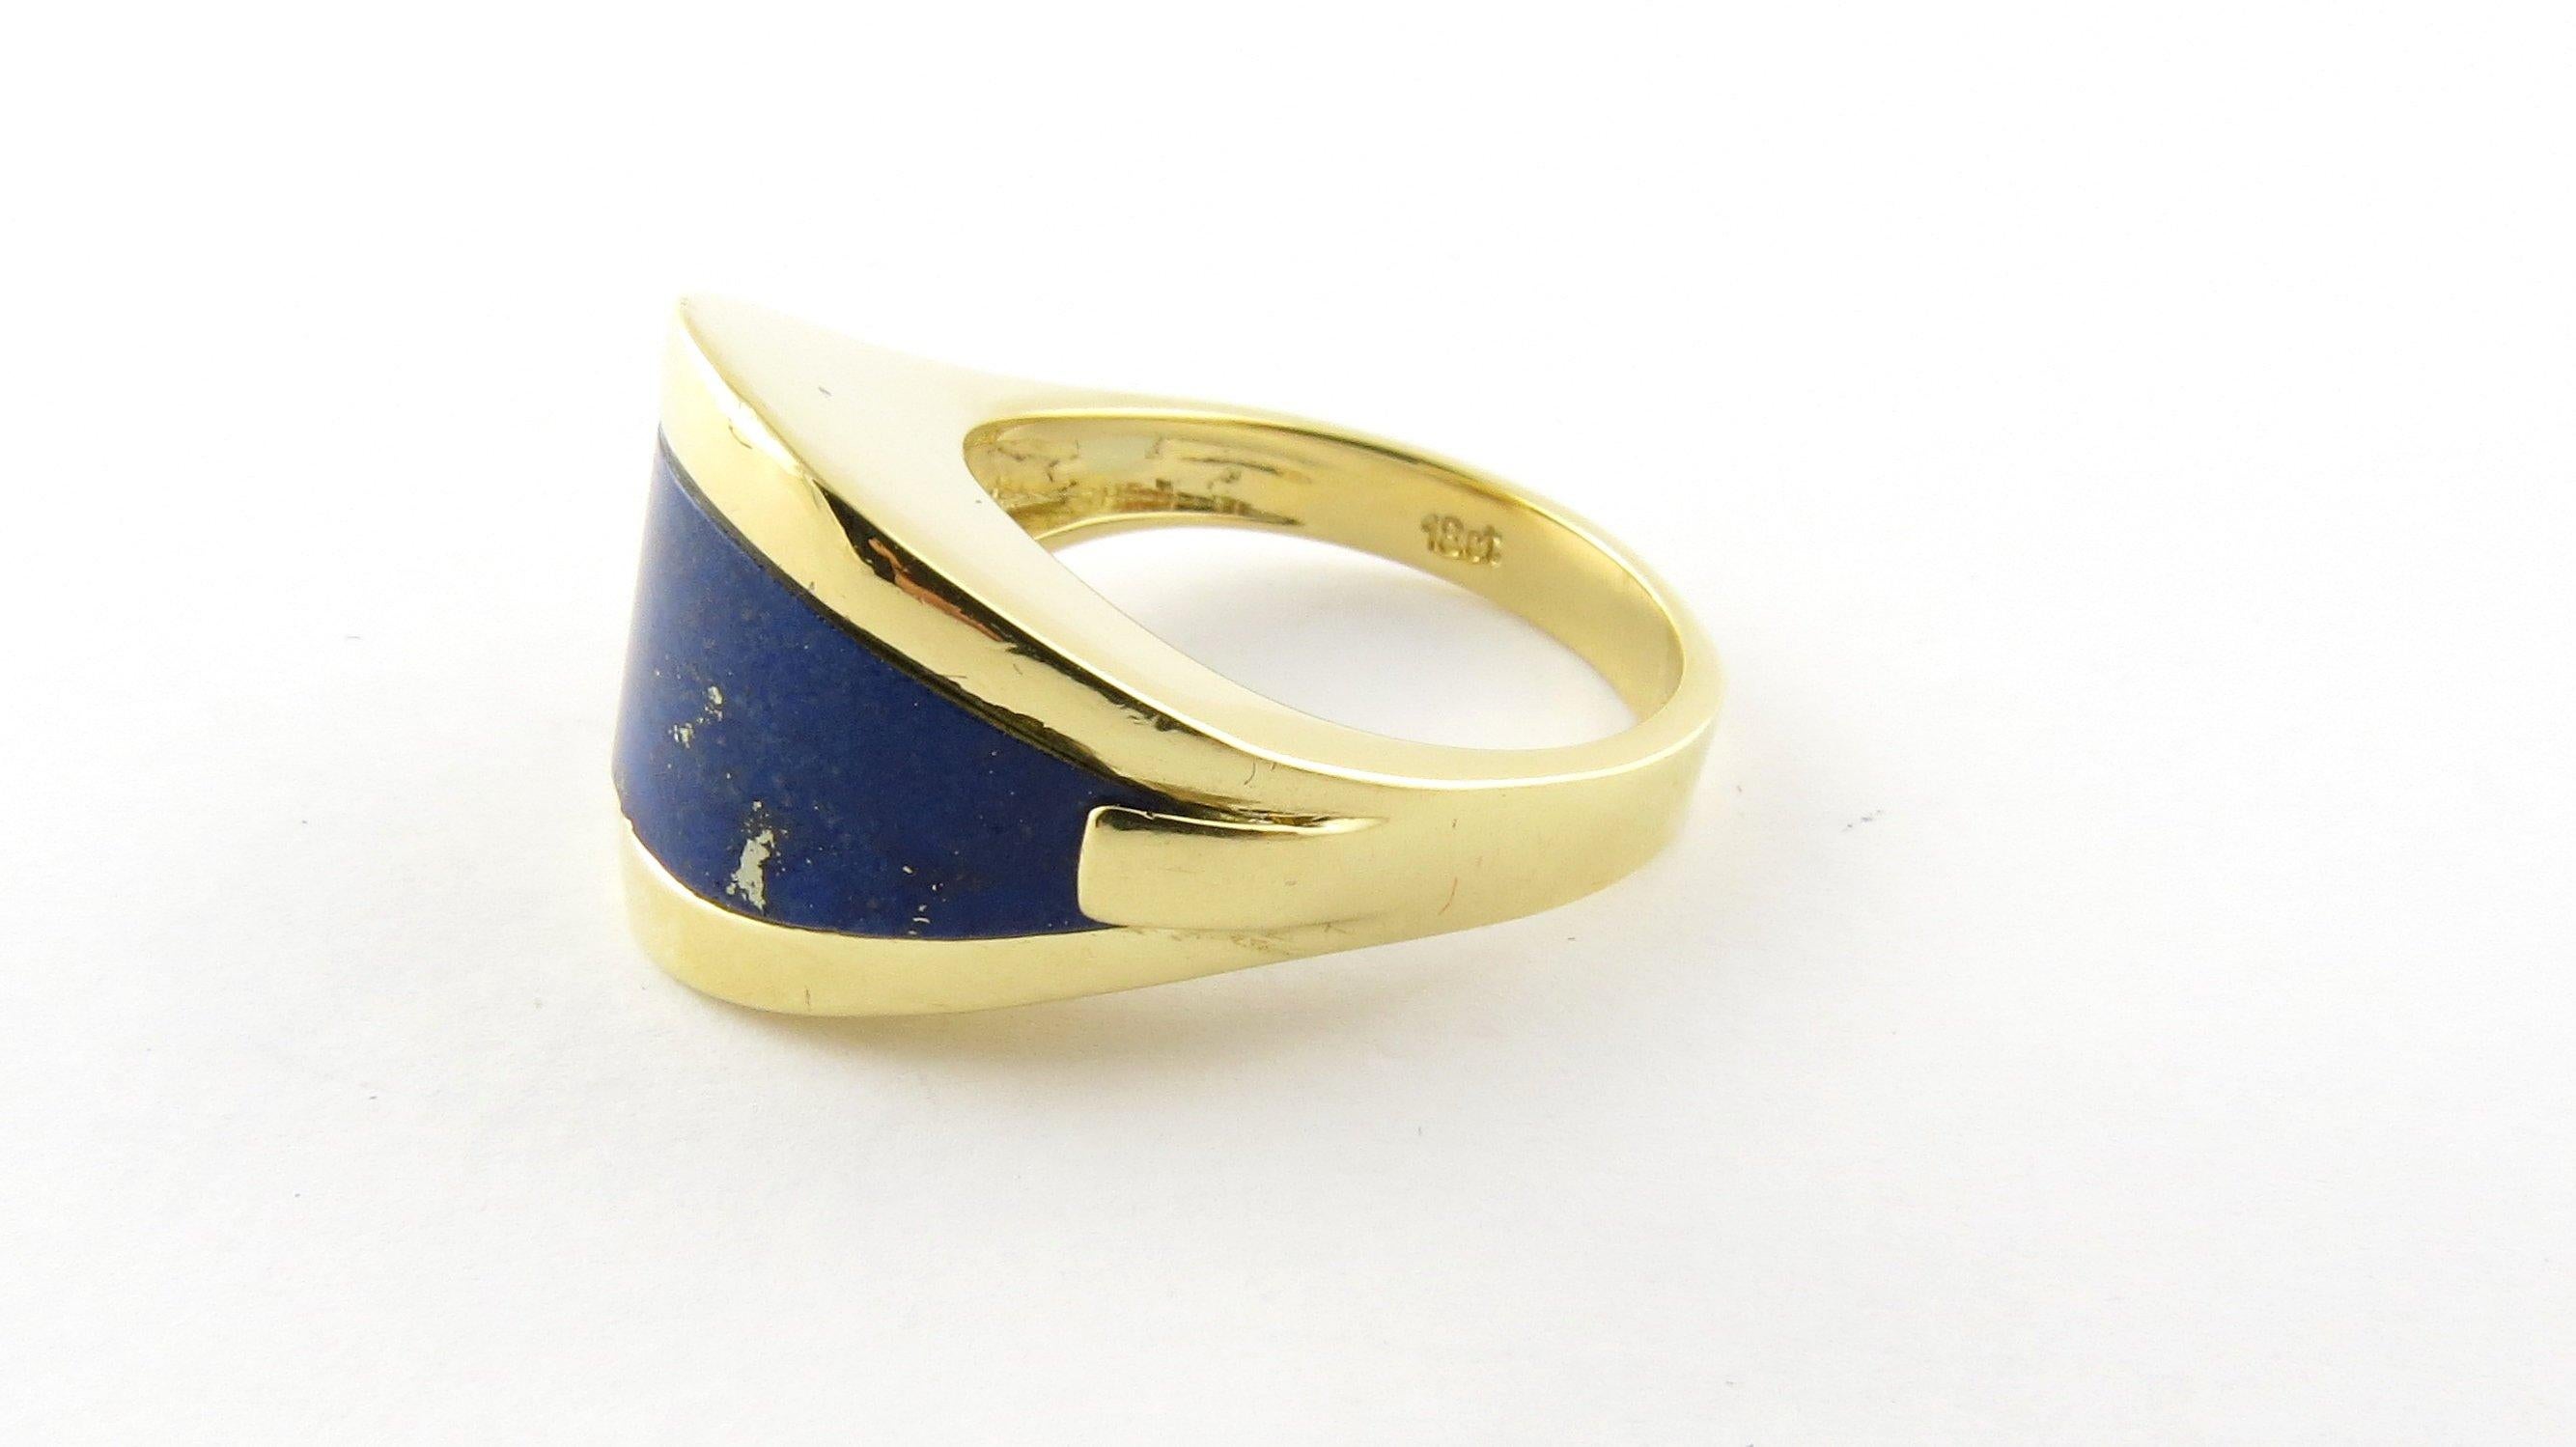 Vintage 18 Karat Yellow Gold and Blue Lapis Ring Size 5.75. This stunning ring features a genuine blue lapis stone set in beautifully detailed 18K yellow gold. Width at widest point: 13 mm. Shank: 3 mm. Height: 8 mm.
Ring Size: 5.75. Weight: 5.1